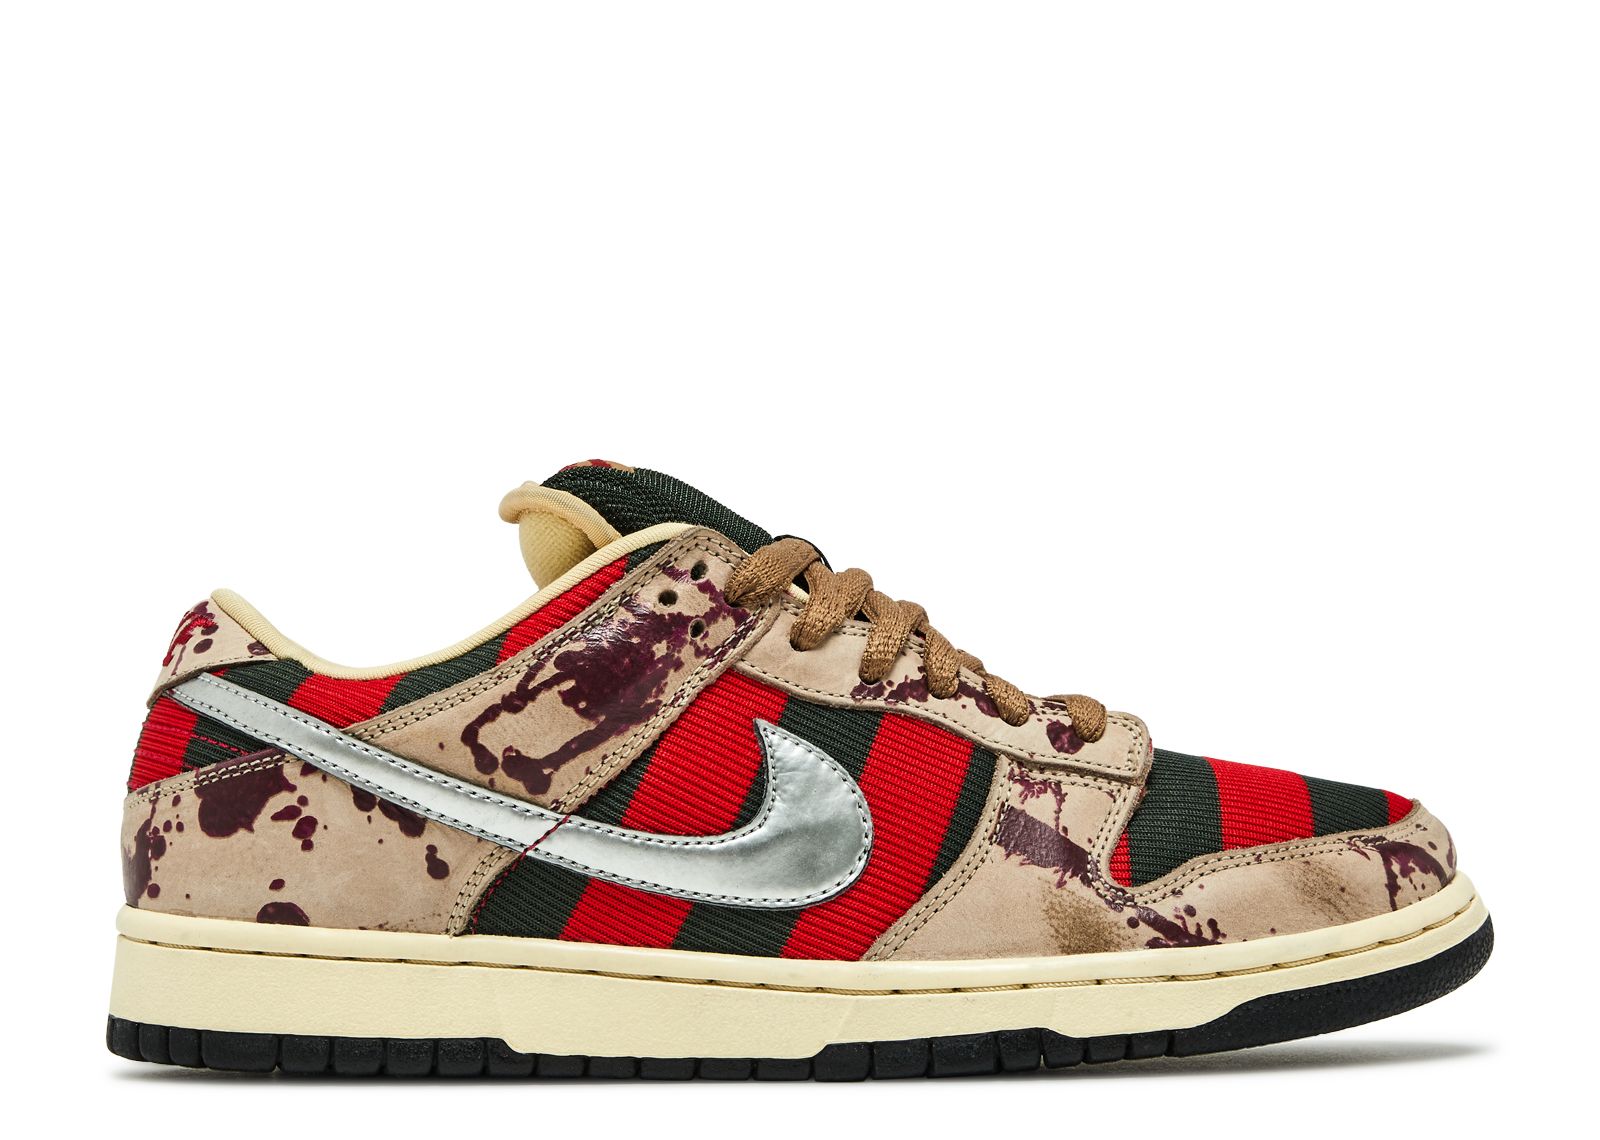 nationalsang mager renovere Dunk Low Pro SB 'Freddy Krueger' - Nike - 313170 202 - taupe/chrome |  Flight Club